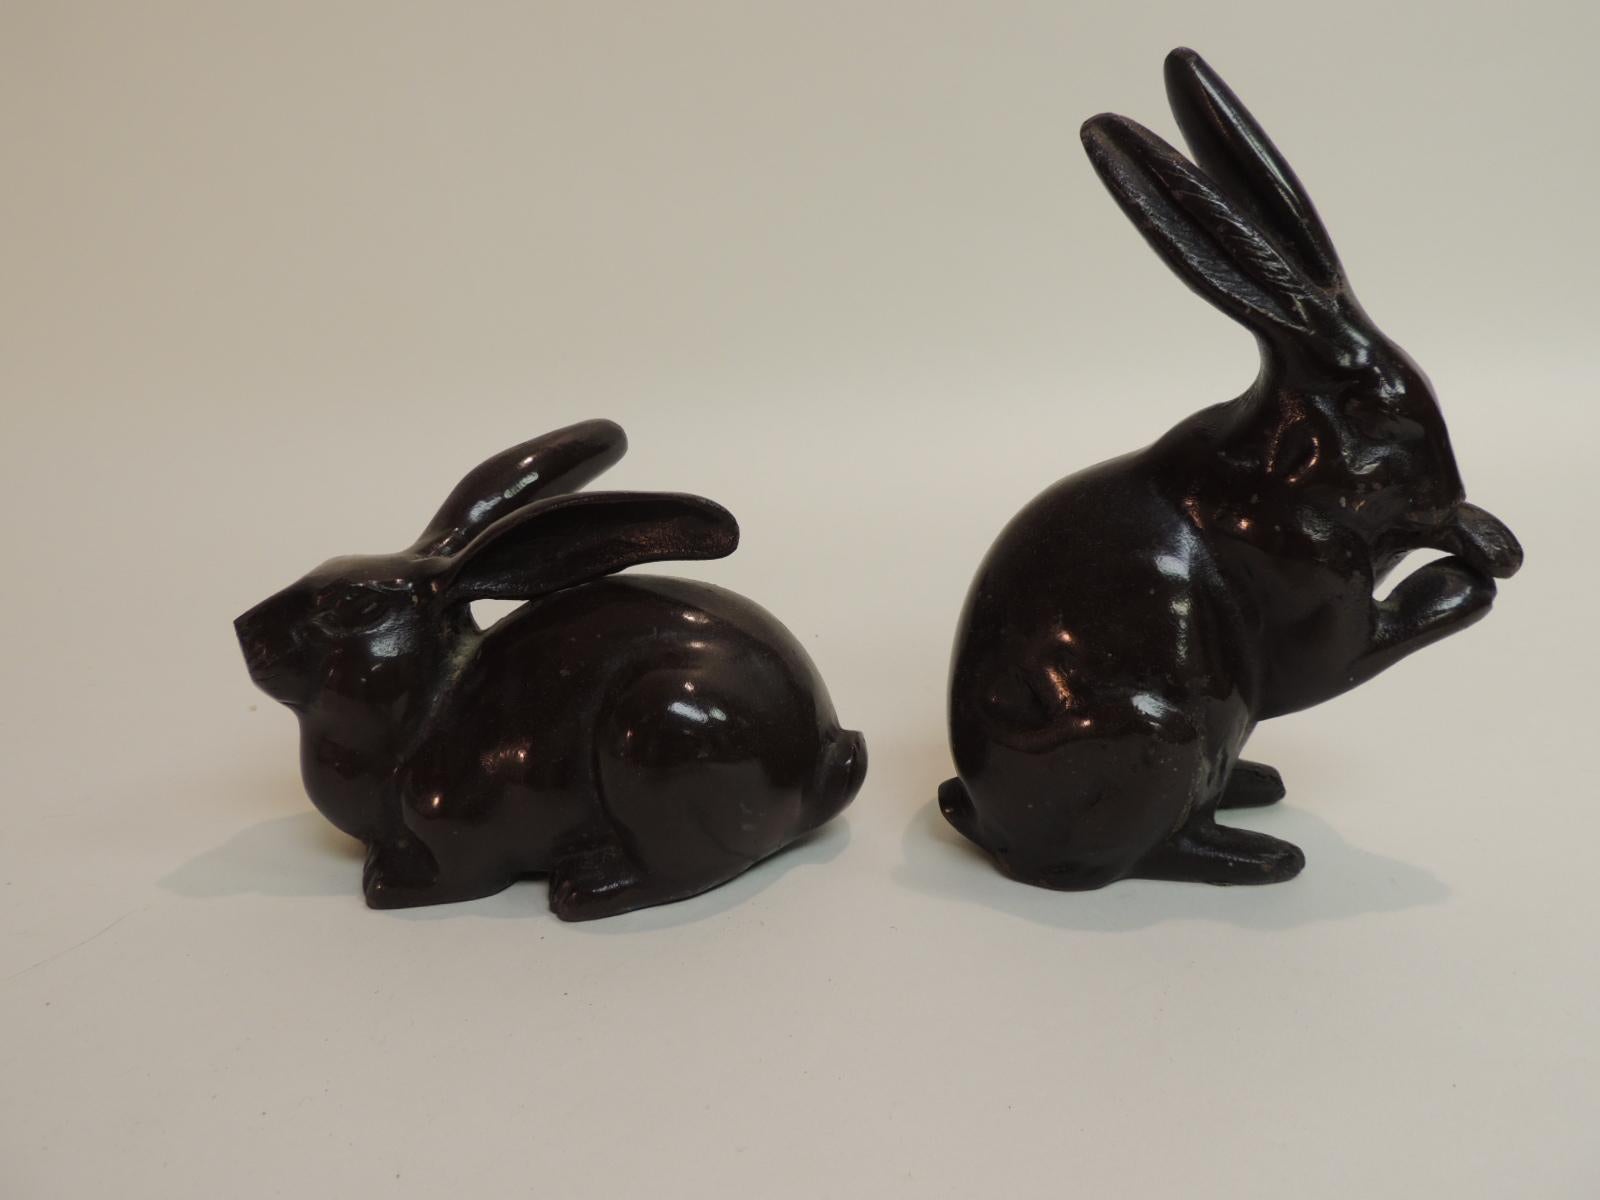 Vintage pair of brown metal rabbits. Solid pair of brass painted glossy brown rabbits.
Measure: Down 7 x 3 x 4
-Standing 3 x 7 x 6.